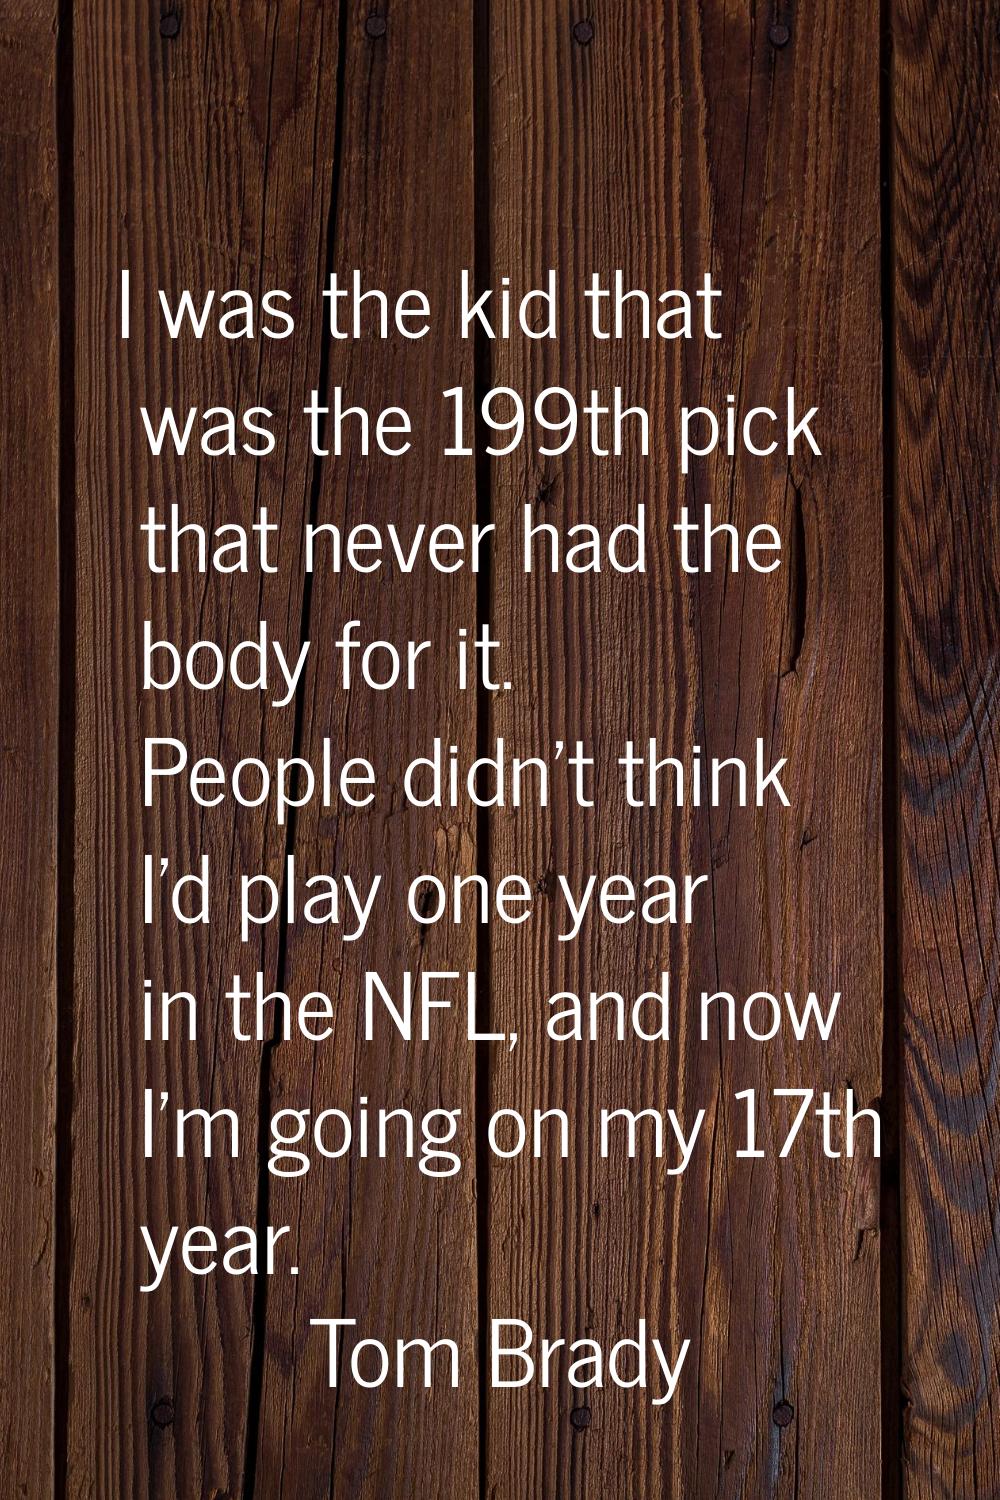 I was the kid that was the 199th pick that never had the body for it. People didn't think I'd play 